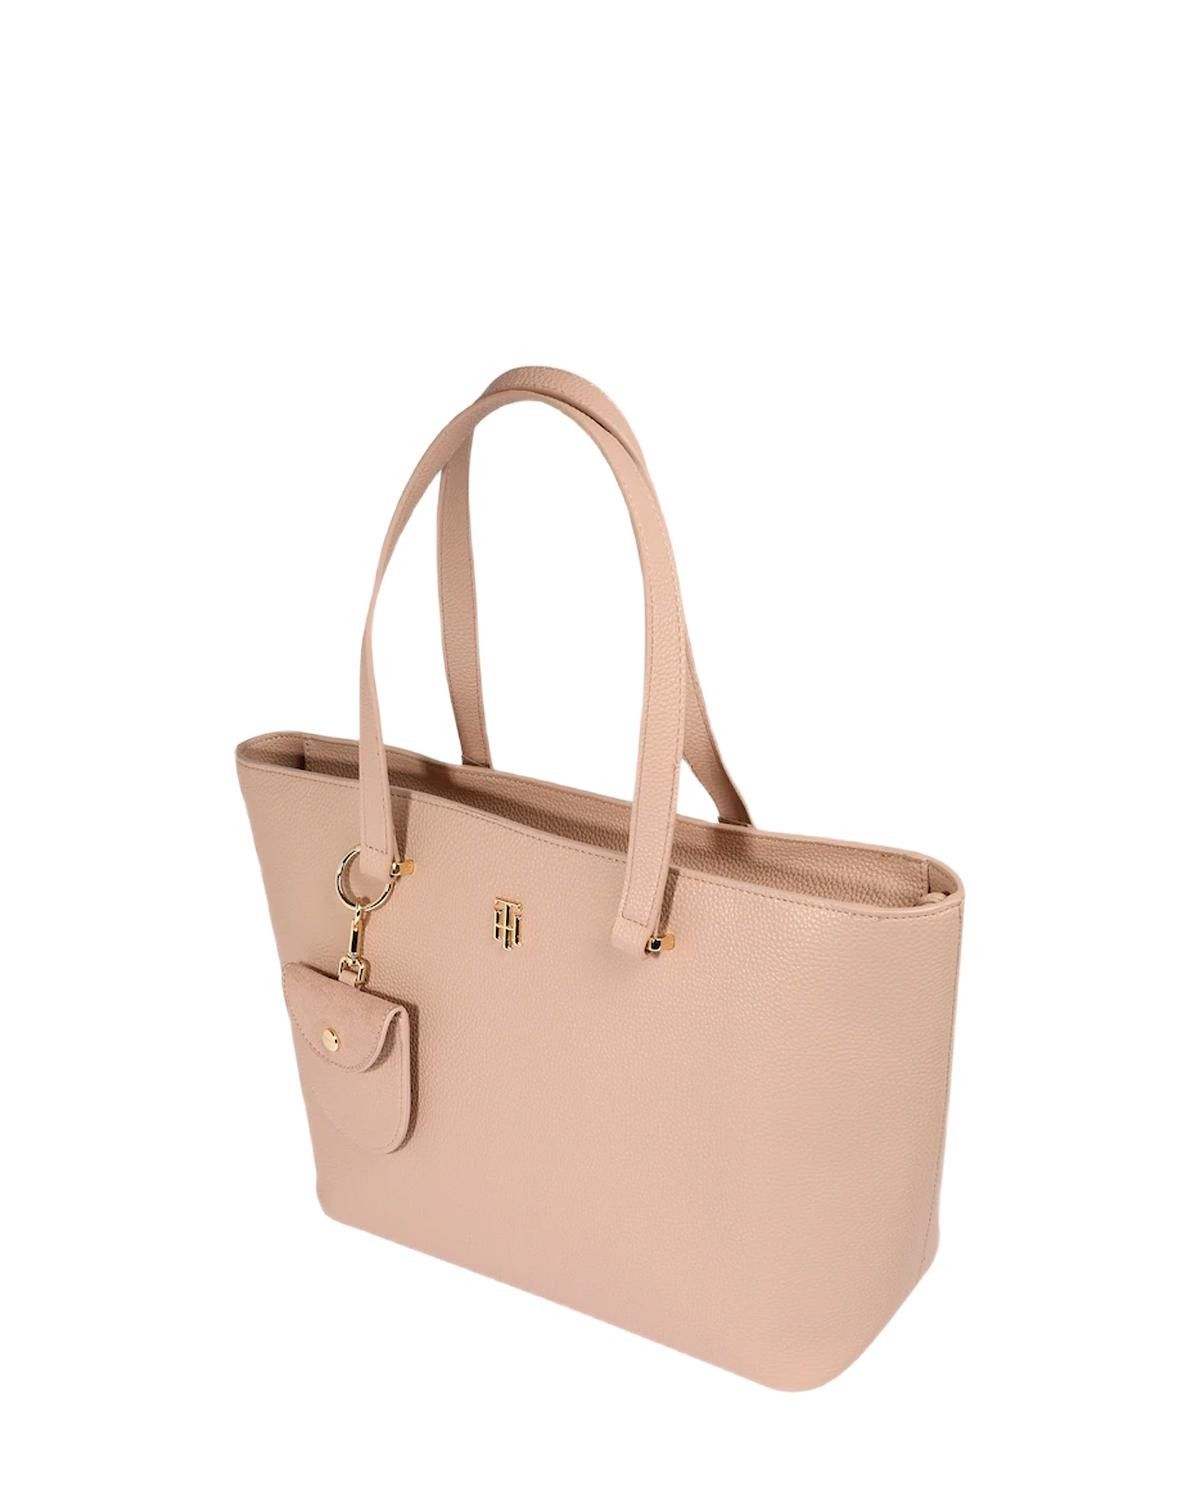 Brand: Tommy Hilfiger Gender: Women Type: Bags Season: Spring/Summer  PRODUCT DETAIL • Color: pink • Pattern: plain • Size (cm): 27 x 34 x 15 cm  • Details: -handbag   COMPOSITION AND MATERIAL • Composition: -100%  polyurethane  •  Washing: machine wash at 30°